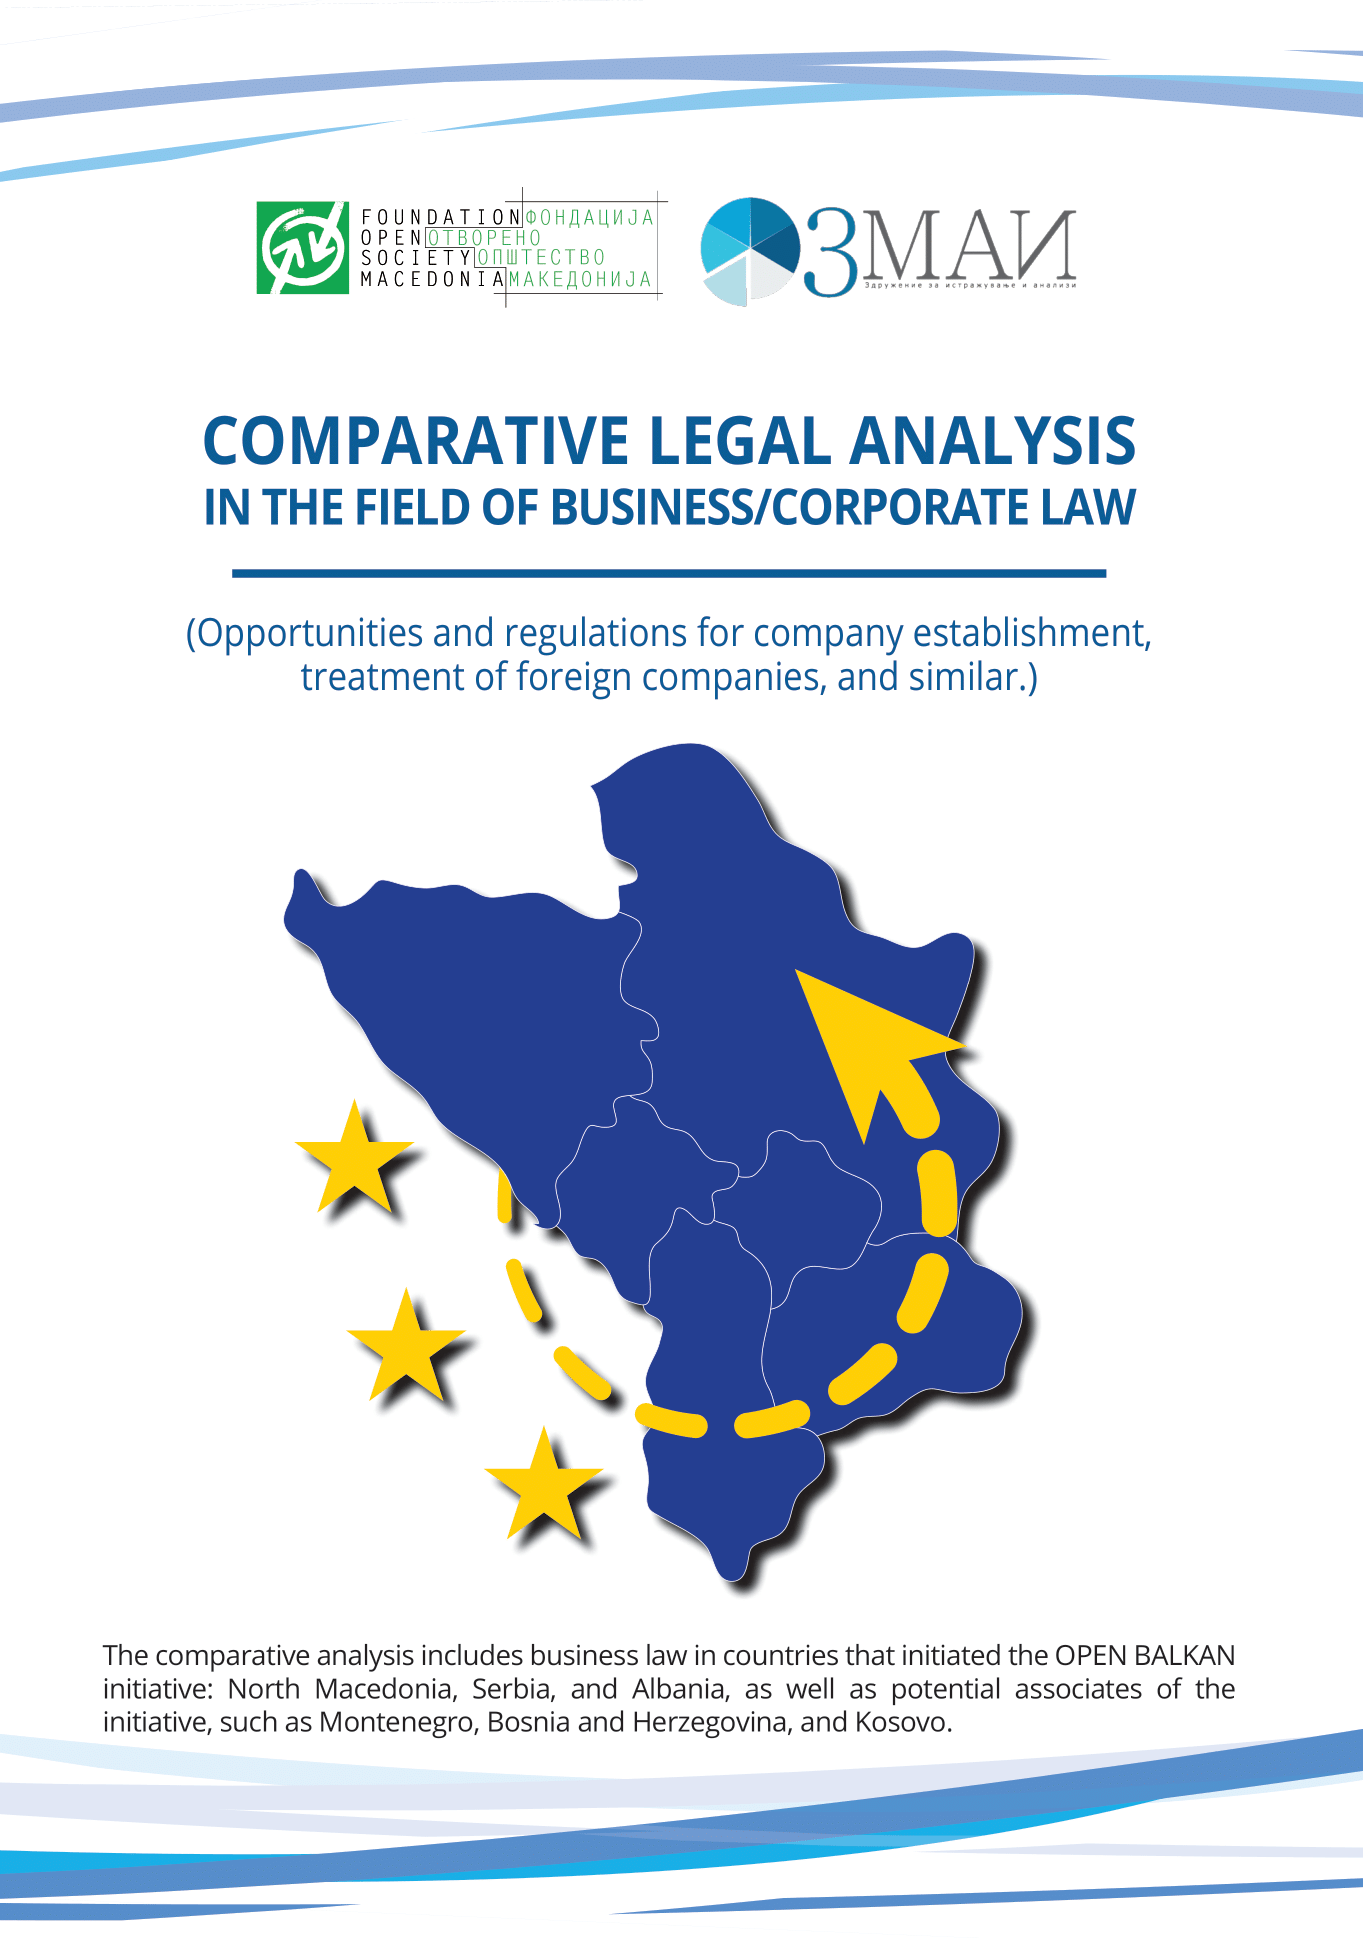 Comparative legal analysis in the field of business/corporate law